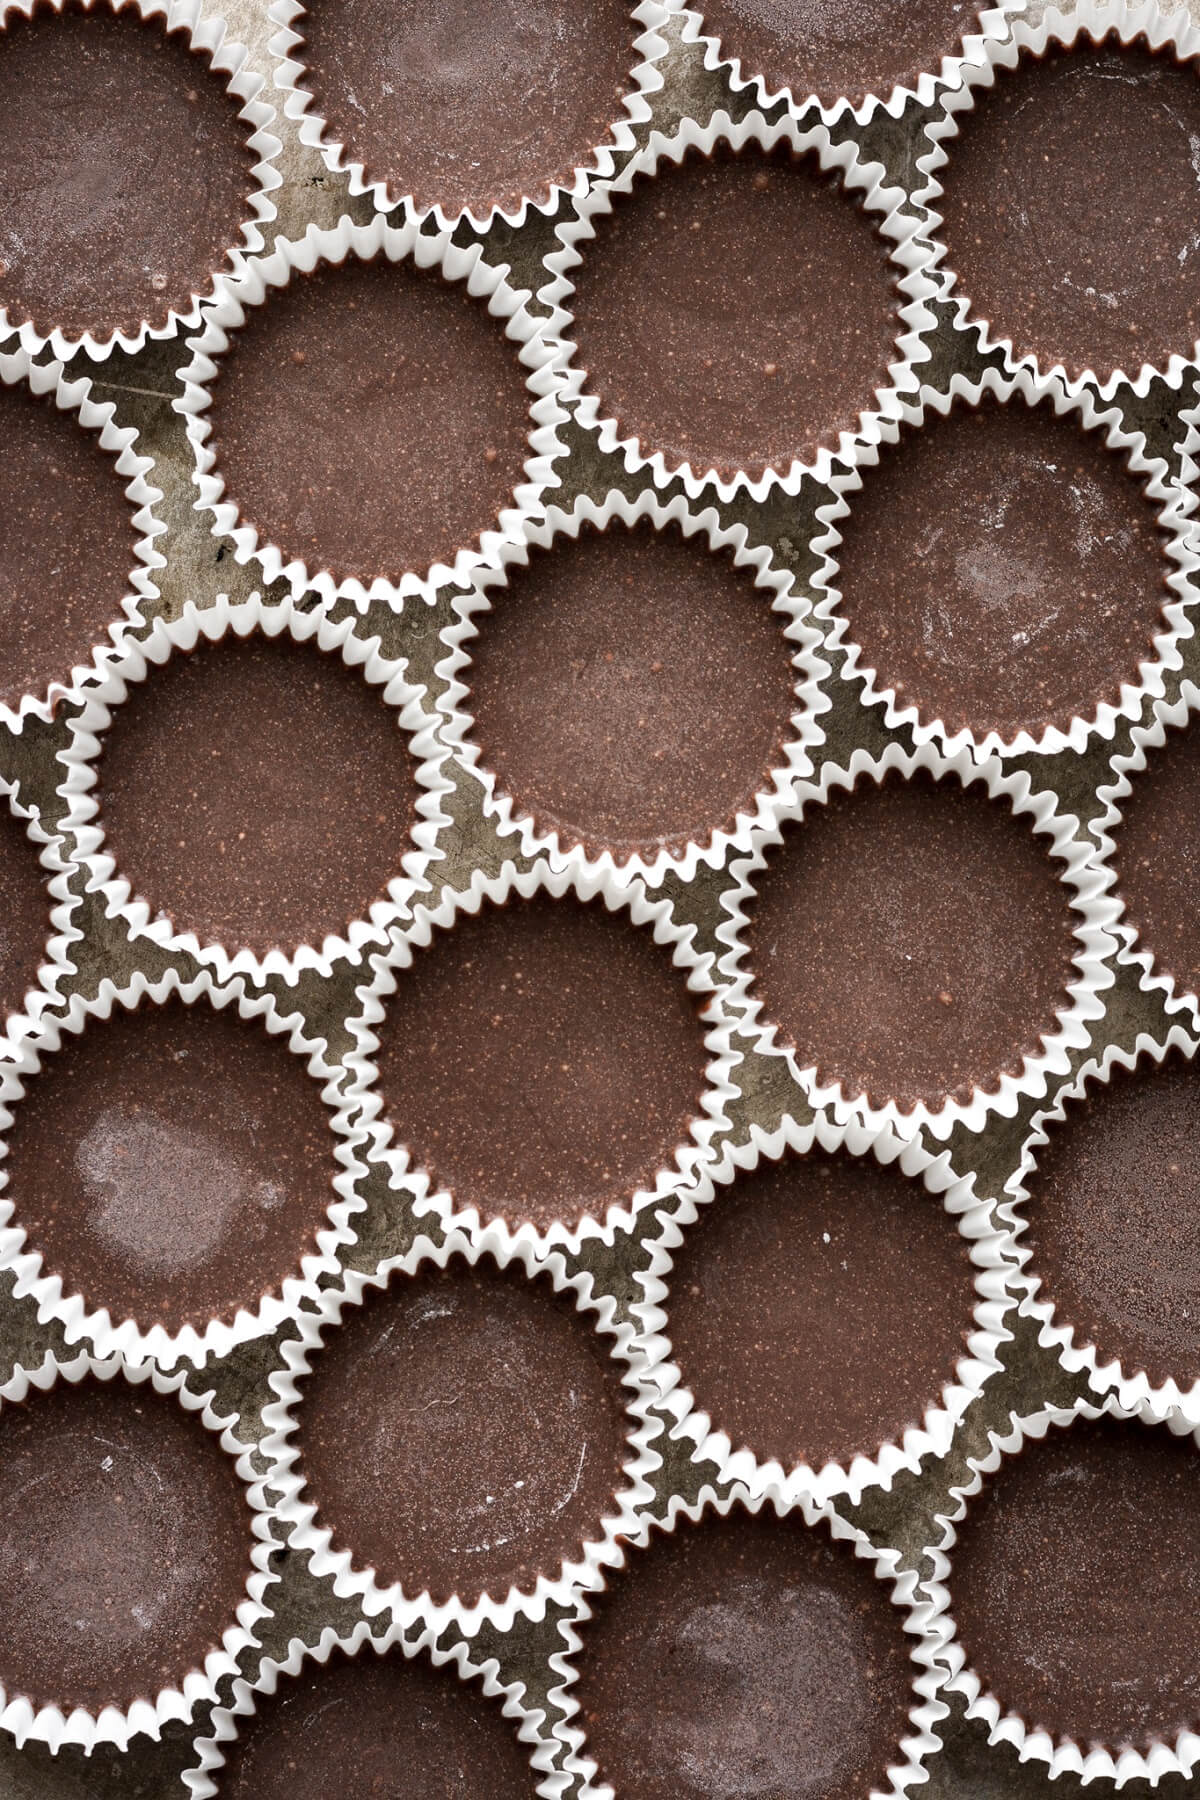 Frozen chocolate almond butter bites in white paper wrappers.